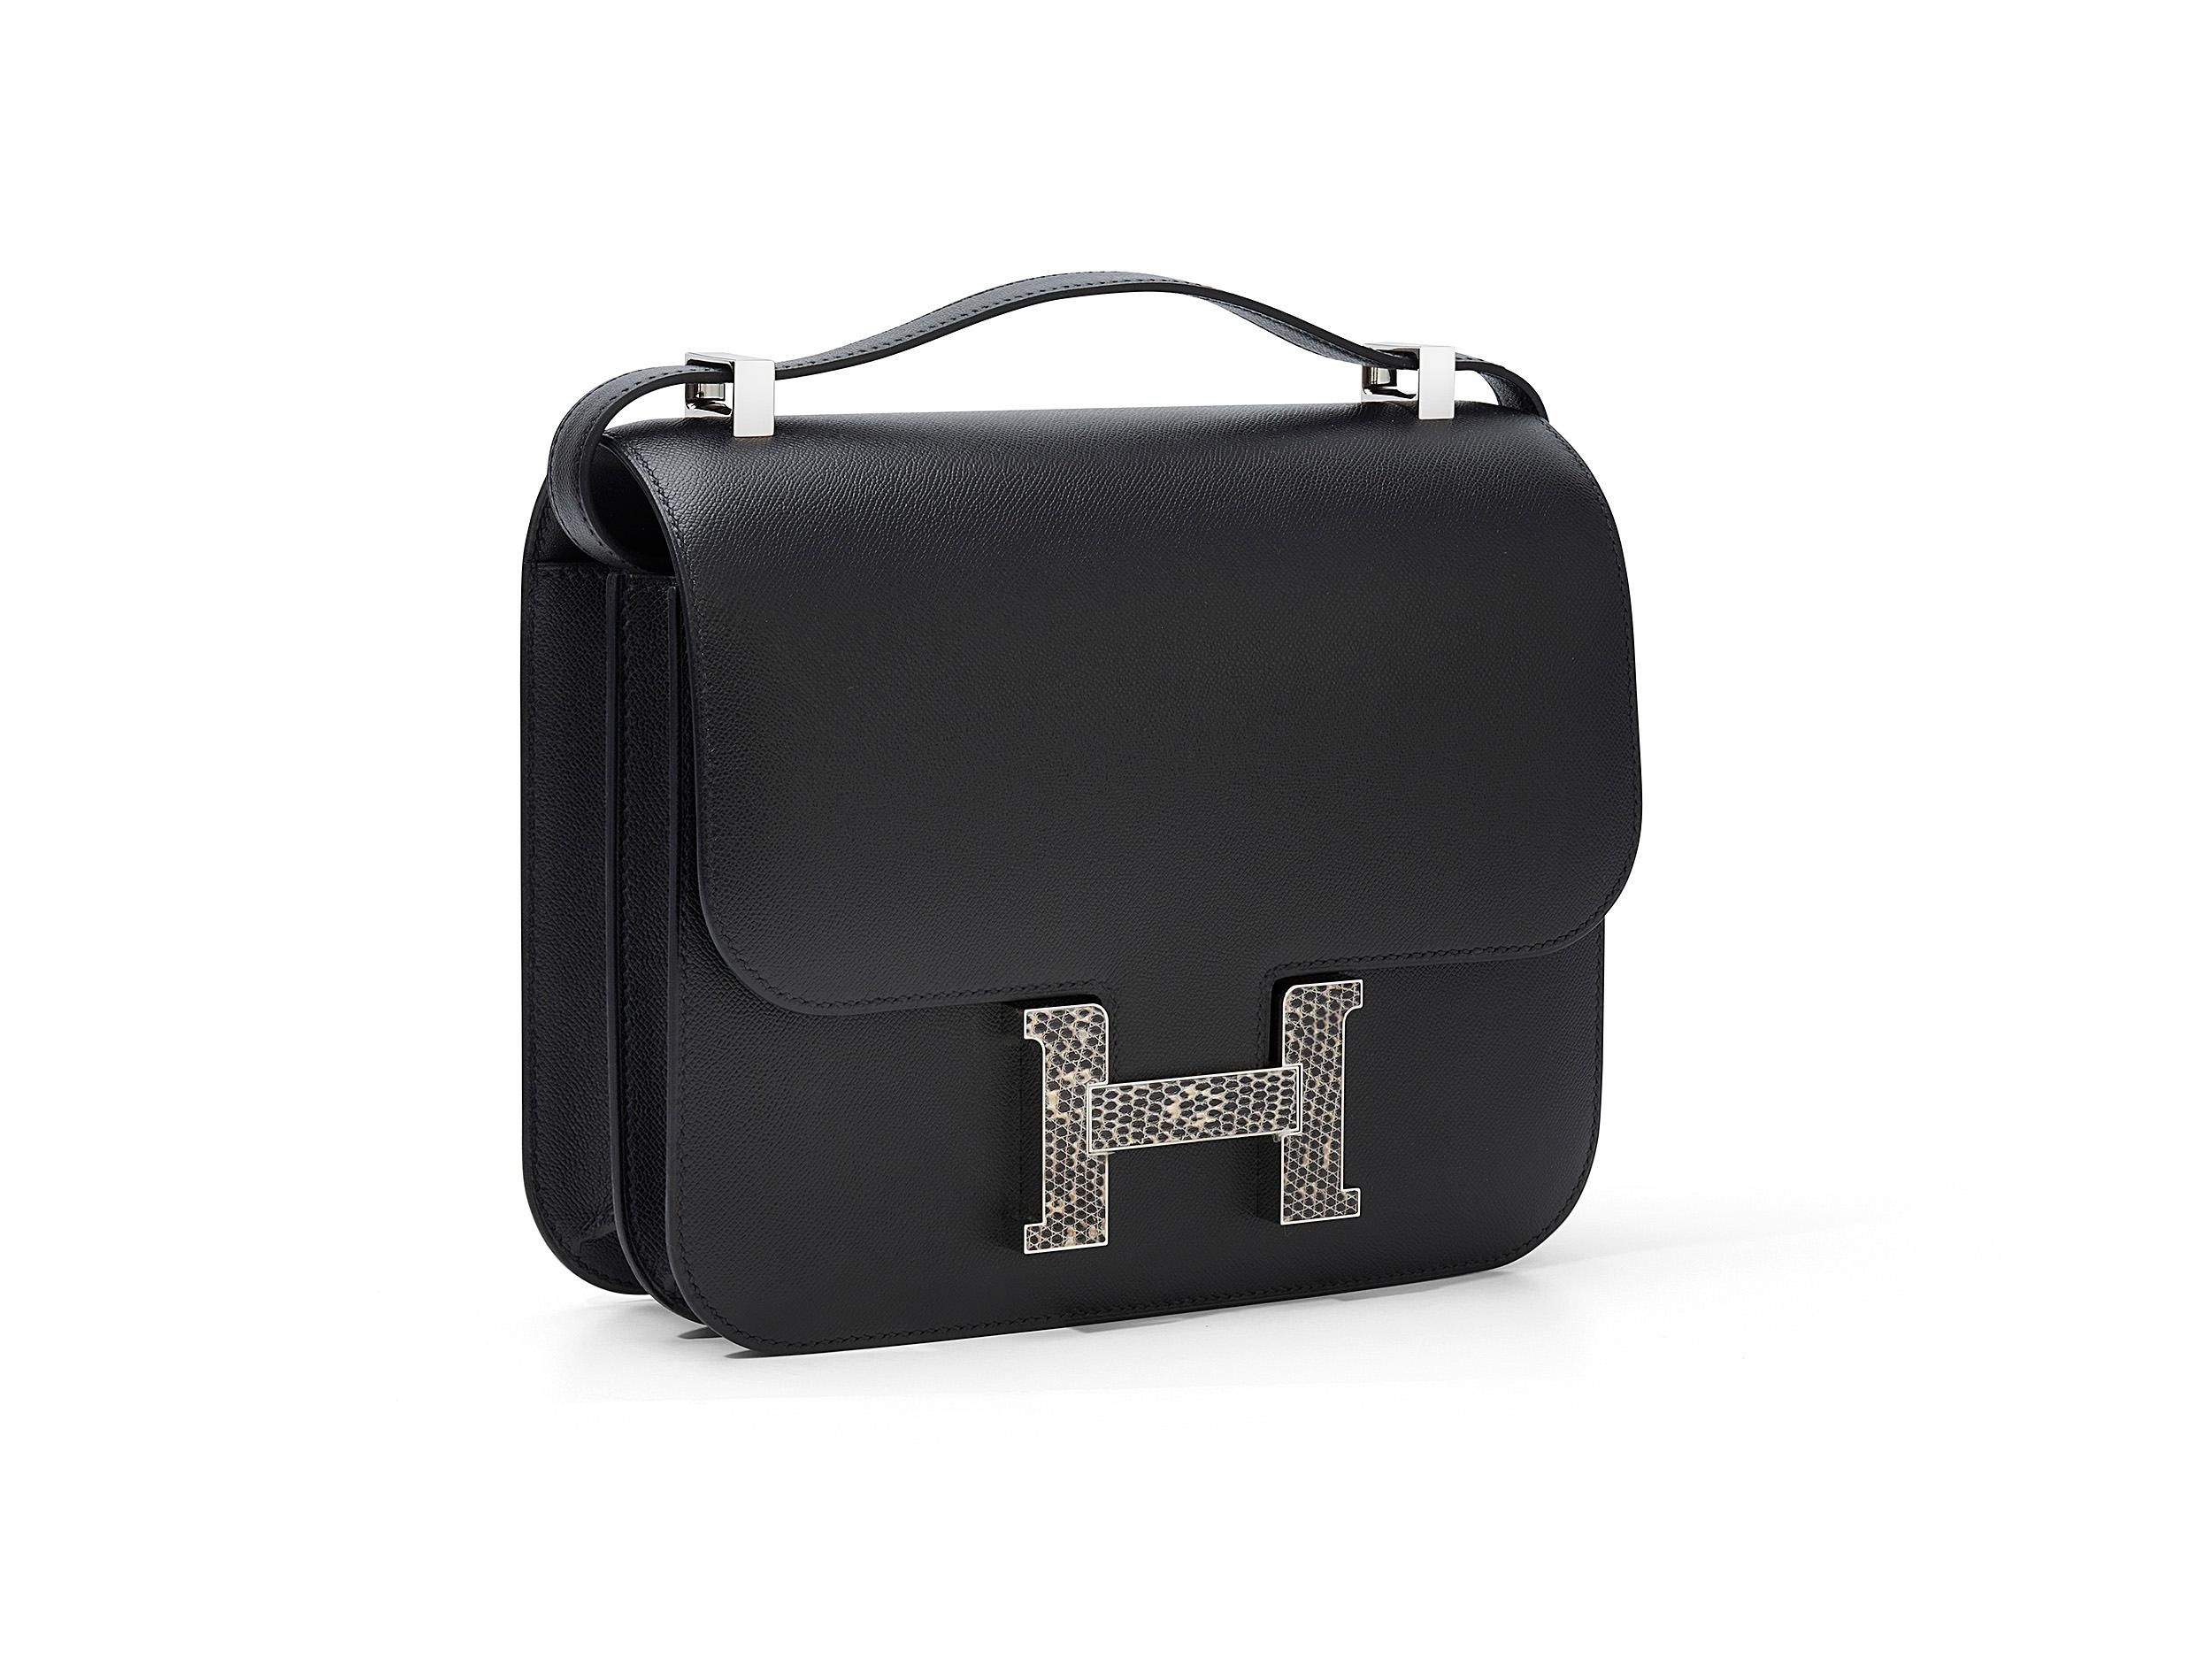 Hermès Constance 24 in noir and veau madame with lizard hardware. This bag is unworn and comes as full set including the original receipt and Cites.
Stamp Y (2020) 

